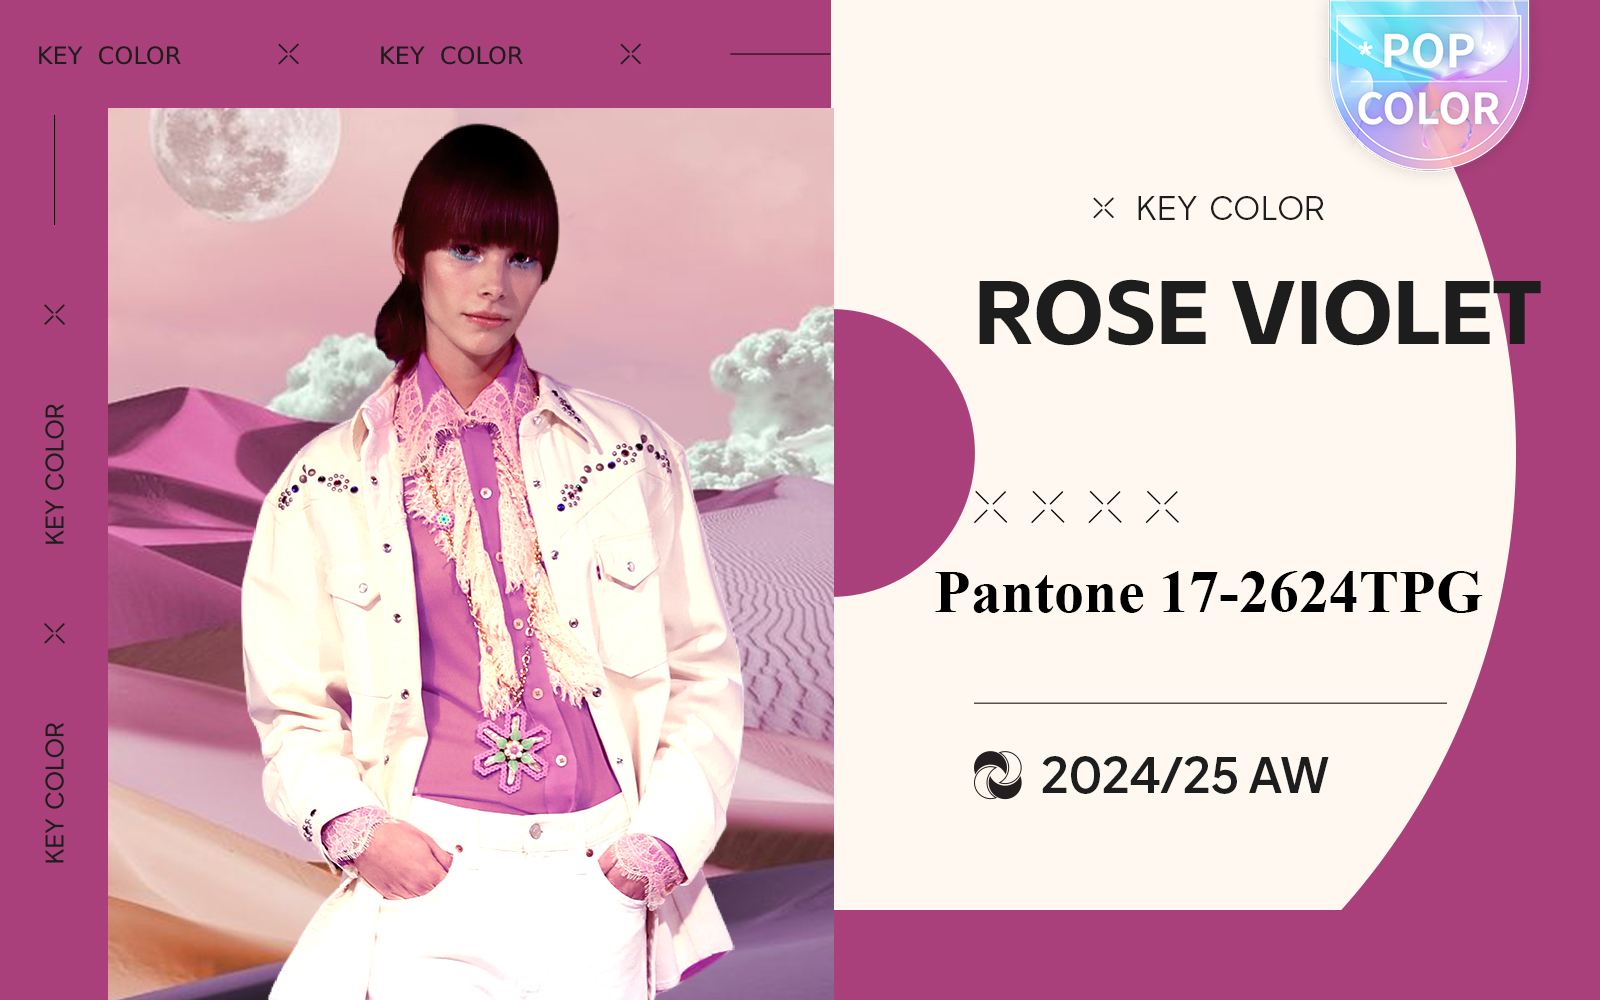 Rose Violet -- The Color Trend for Womenswear